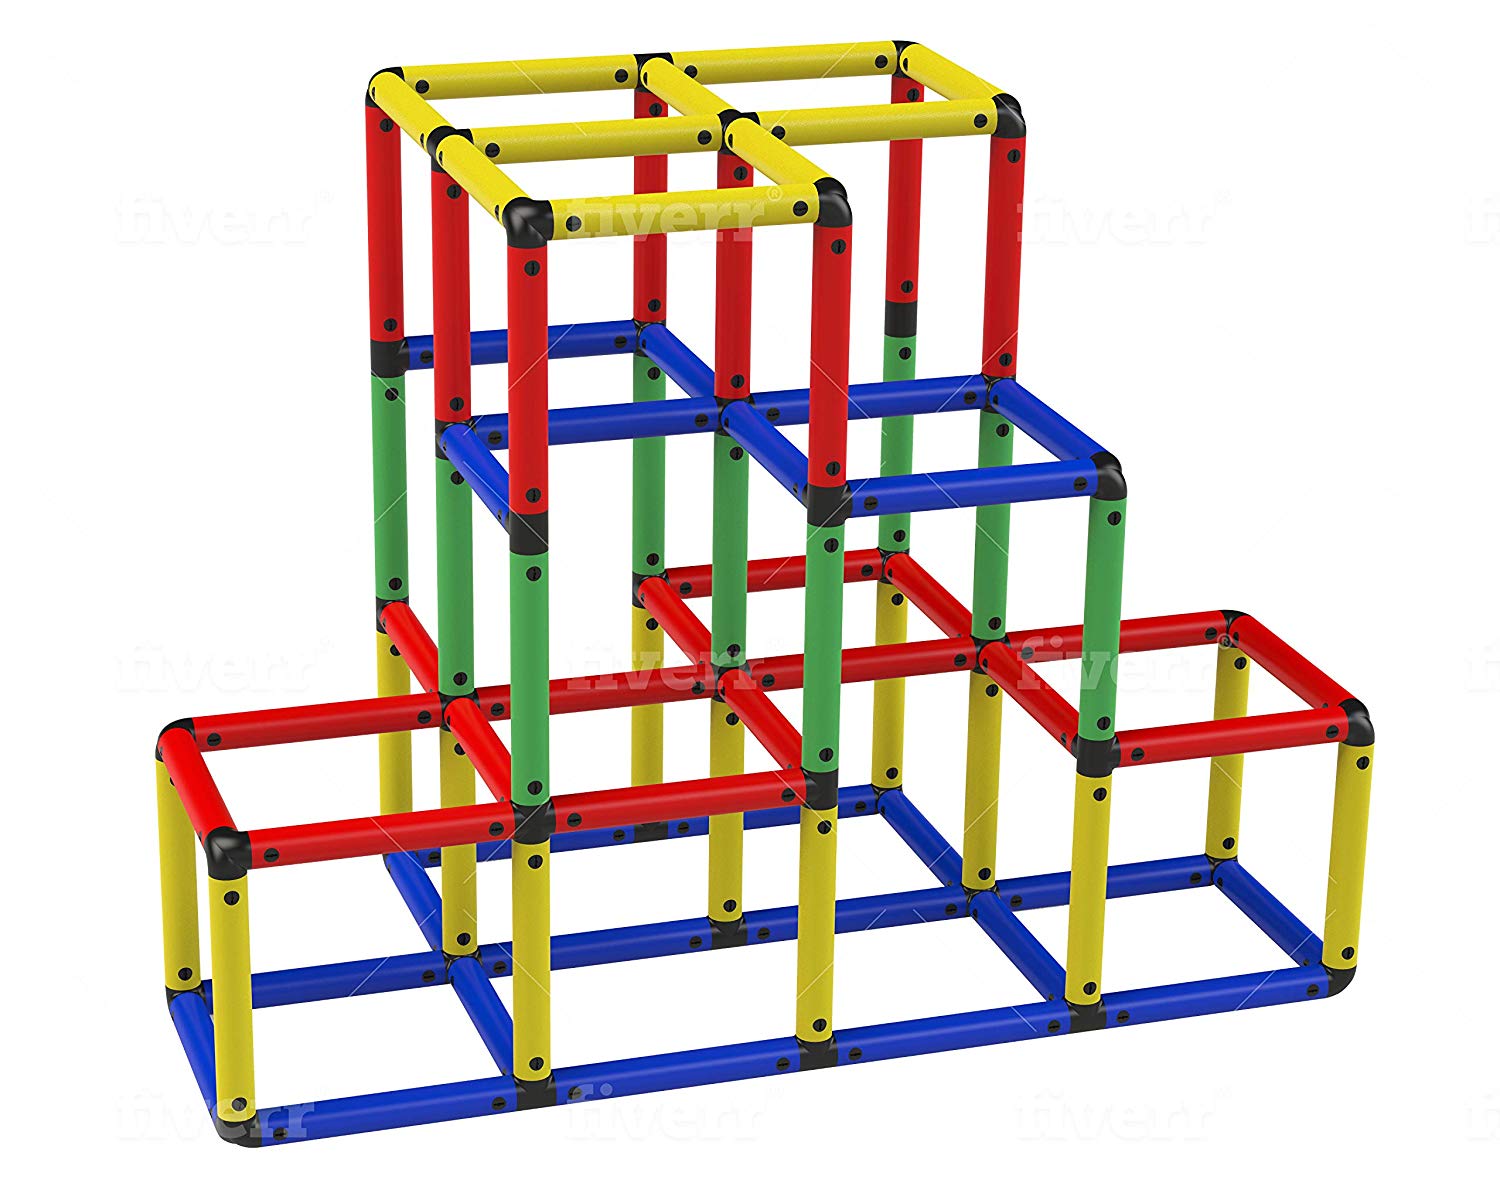 Funphix Climbing Gyms Stem Learning Colorful Buildable Indoor Outdoor Play Structure for Kids Aged 2-12 Years